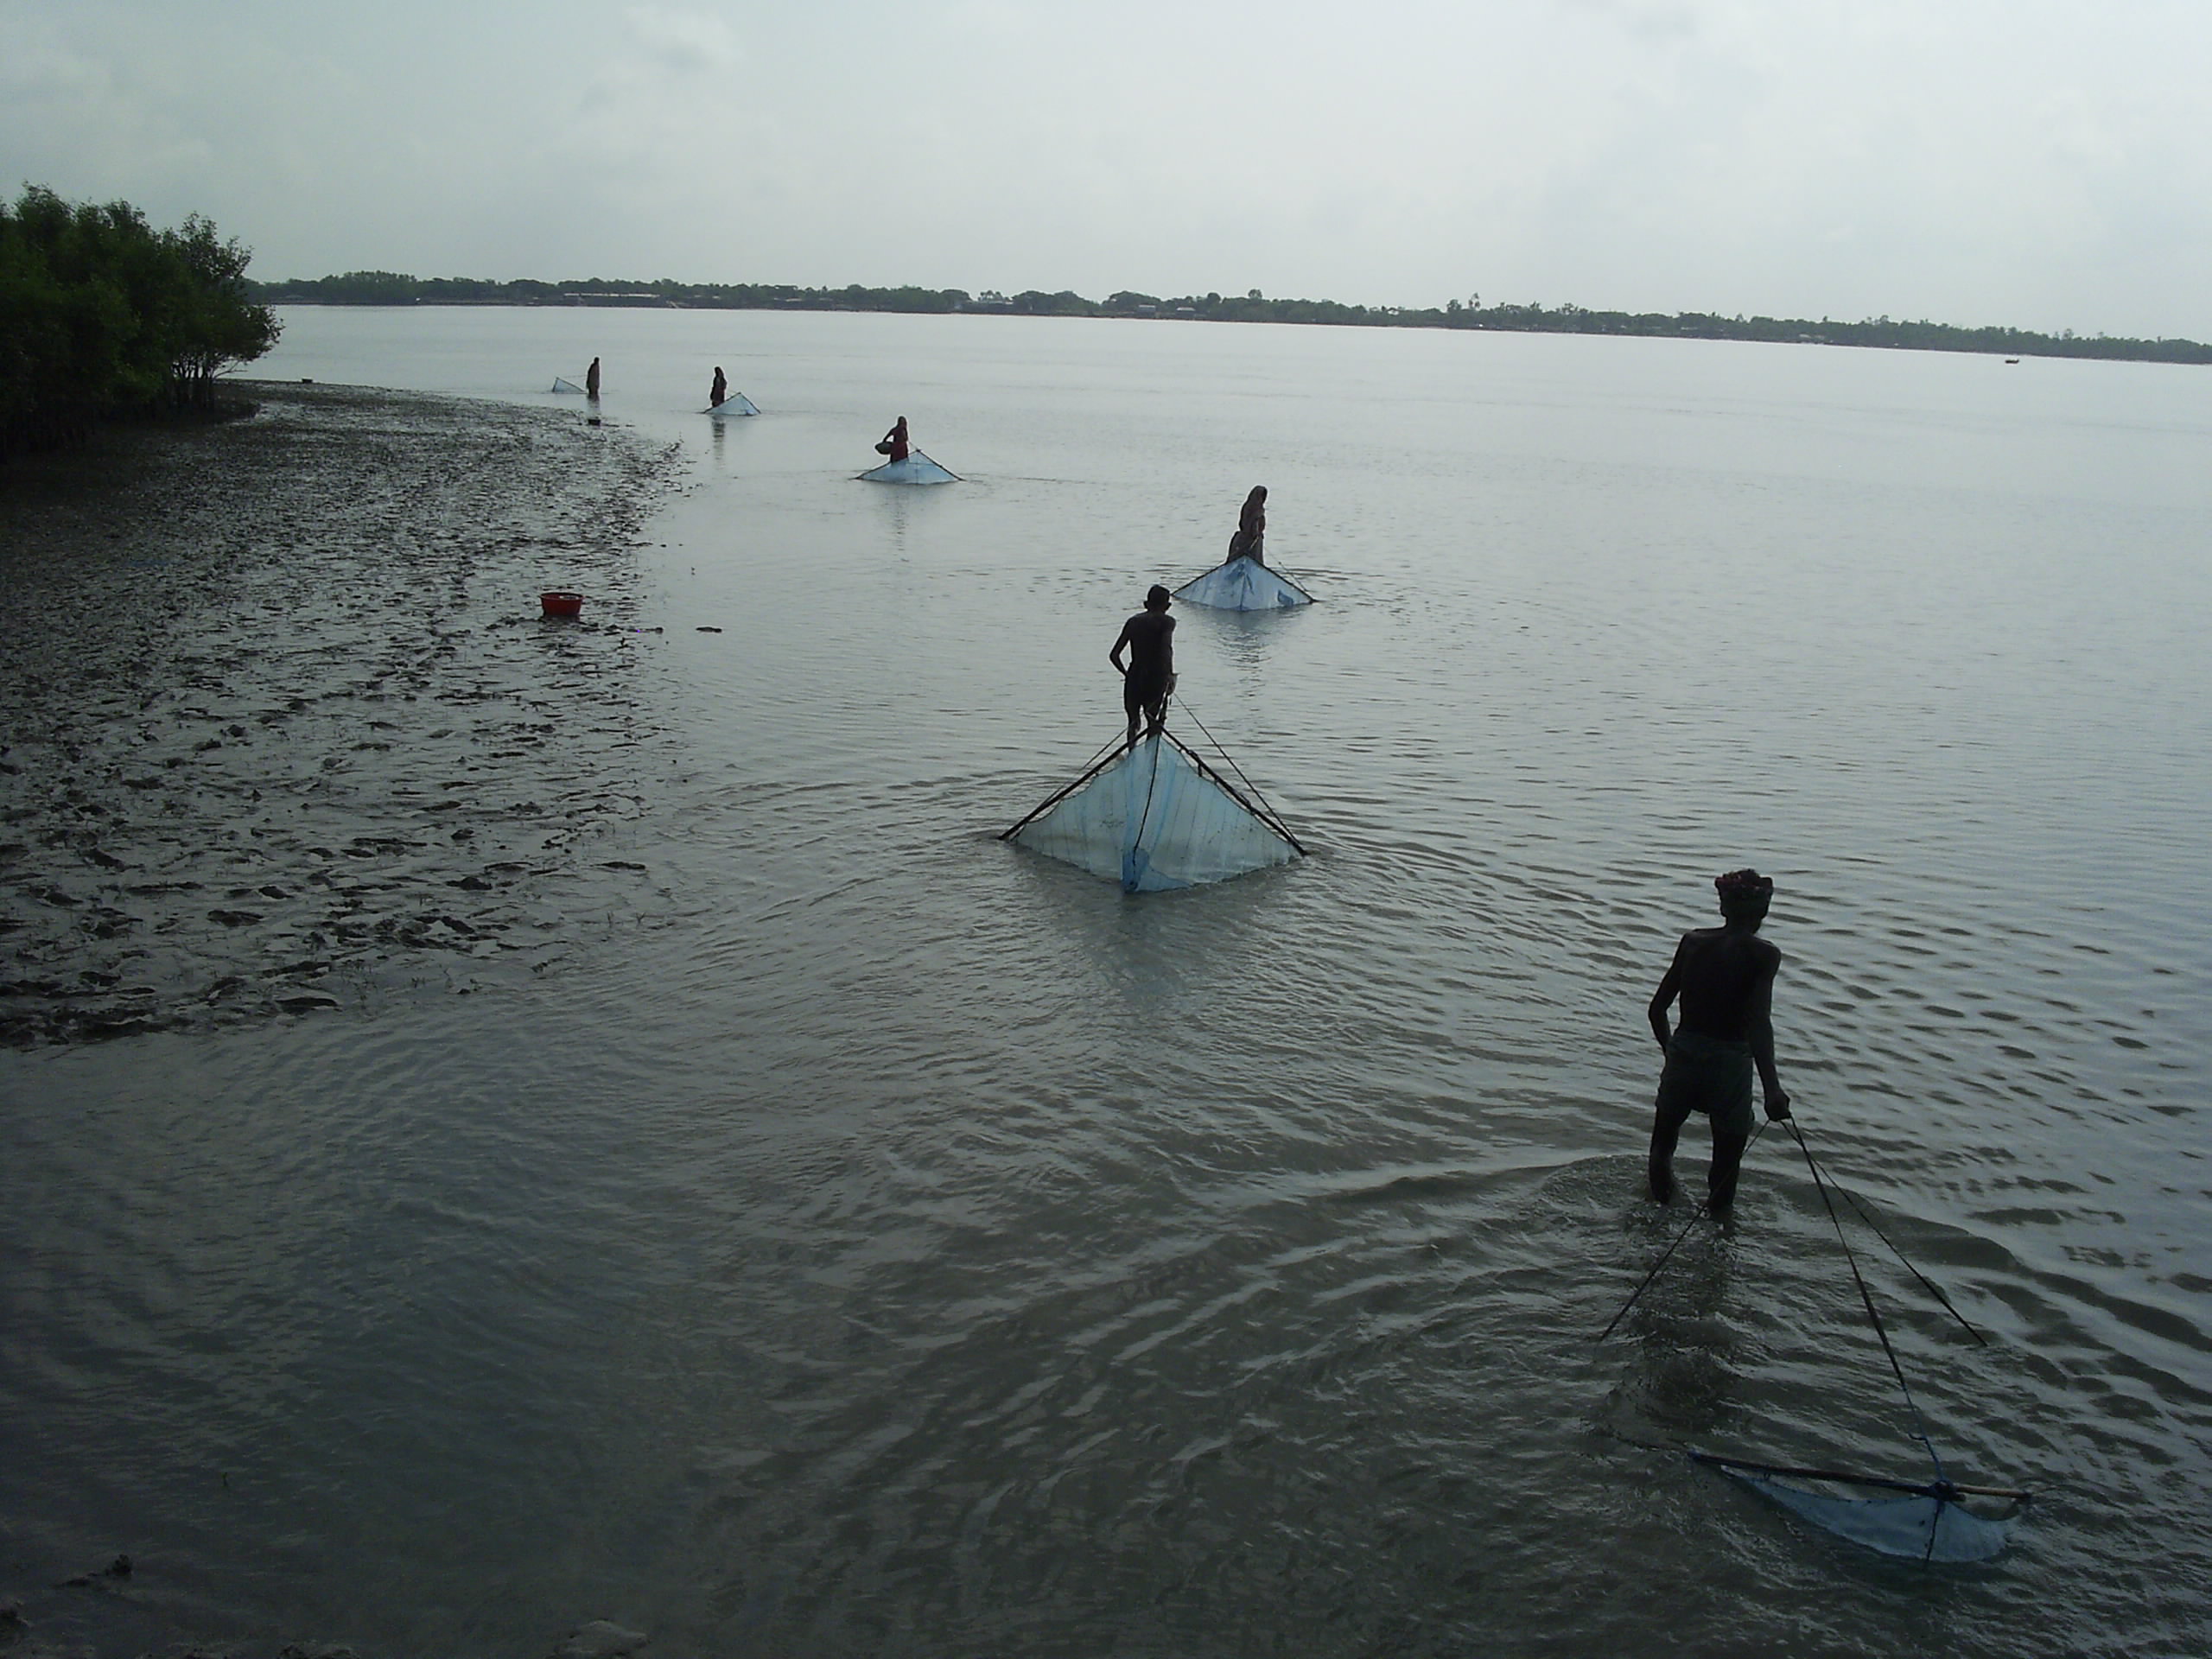 Prawn fishery in mangrove forest